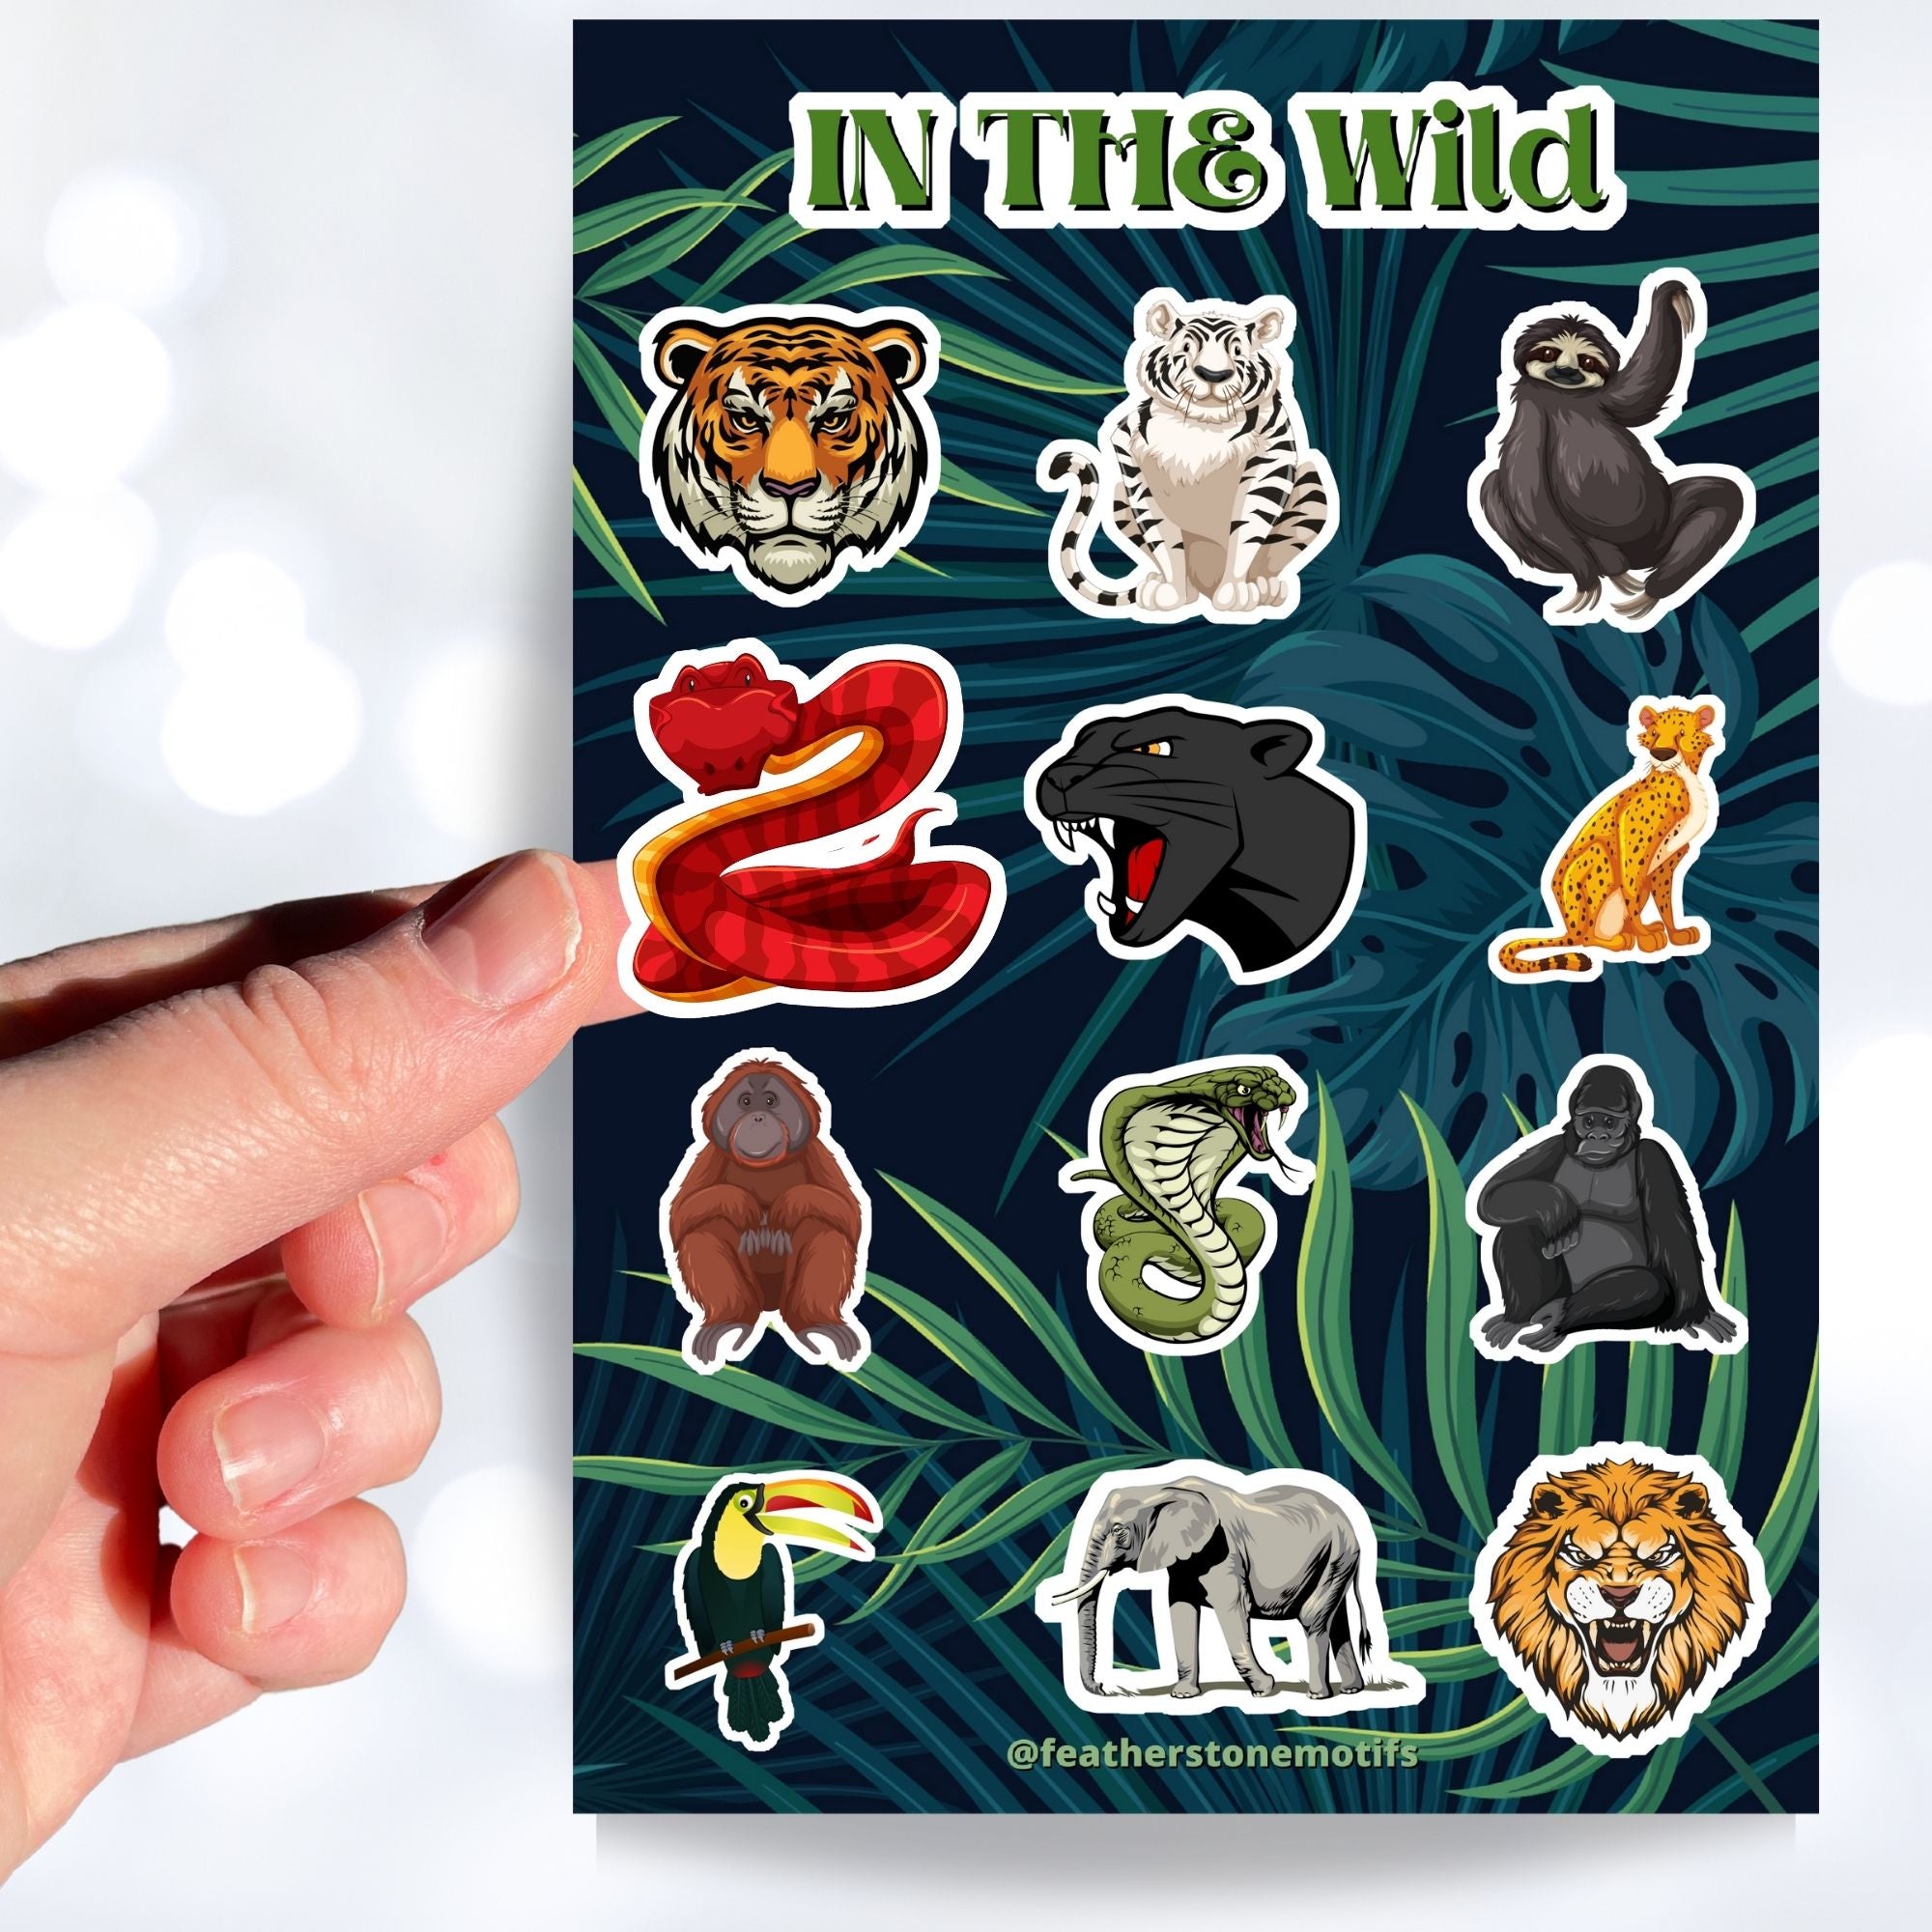 This sticker sheet has sticker images of your favorite jungle and rain forest creatures! There are a dozen different sticker images including tigers, a lion, a gorilla, snakes, and even a sloth.  This image shows a hand holding a sticker of a snake over the sticker sheet.